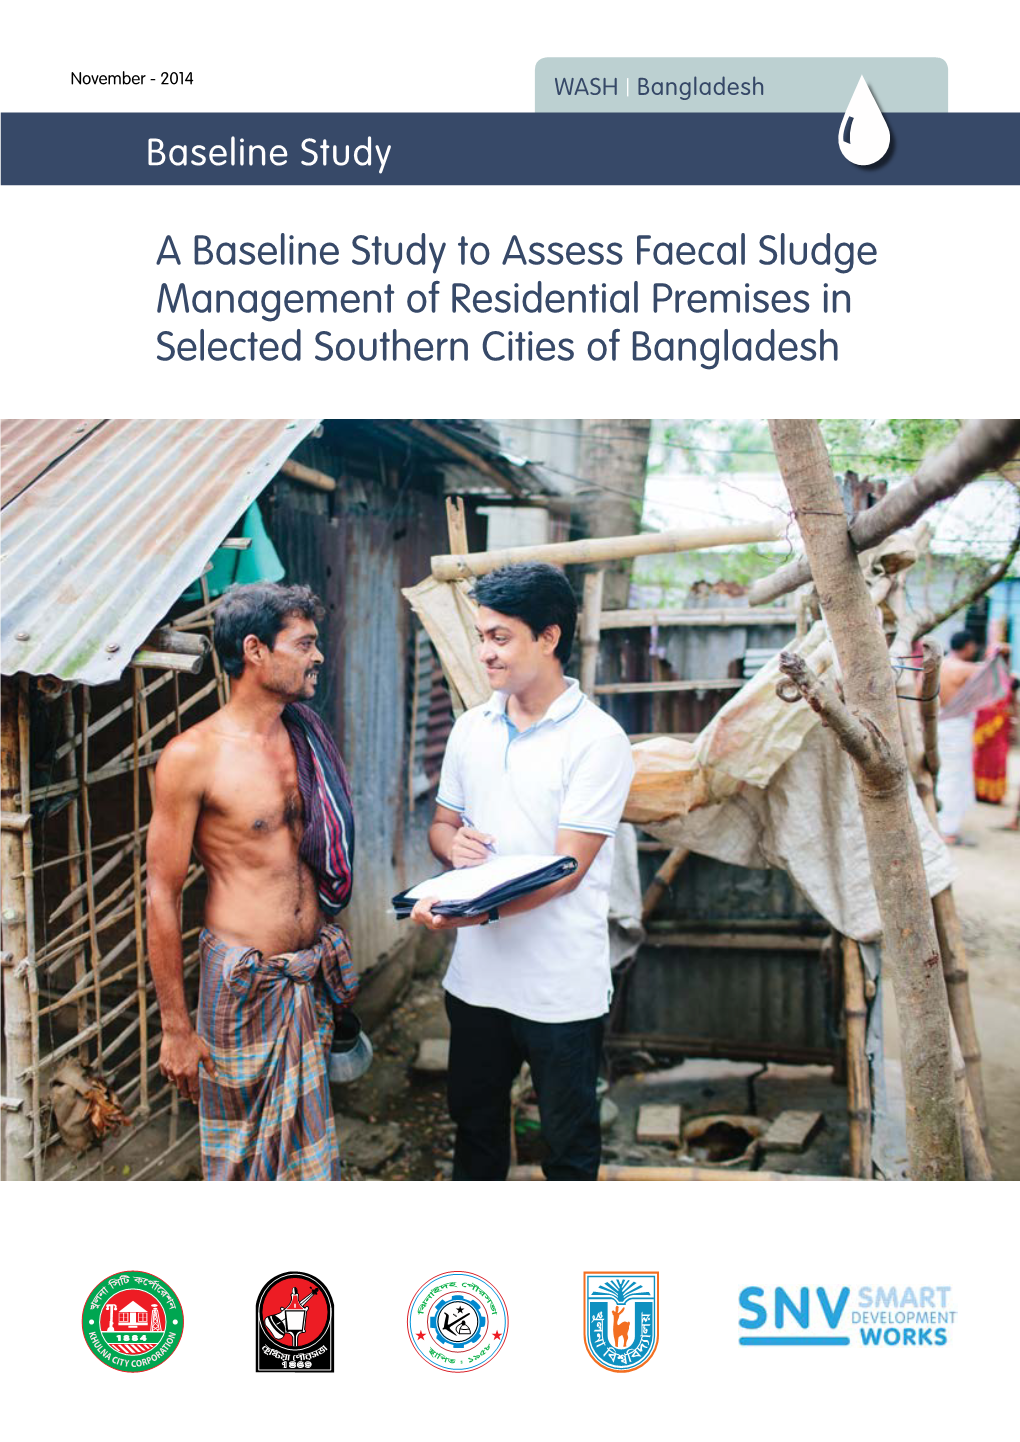 A Baseline Study to Assess Faecal Sludge Management of Residential Premises in Selected Southern Cities of Bangladesh